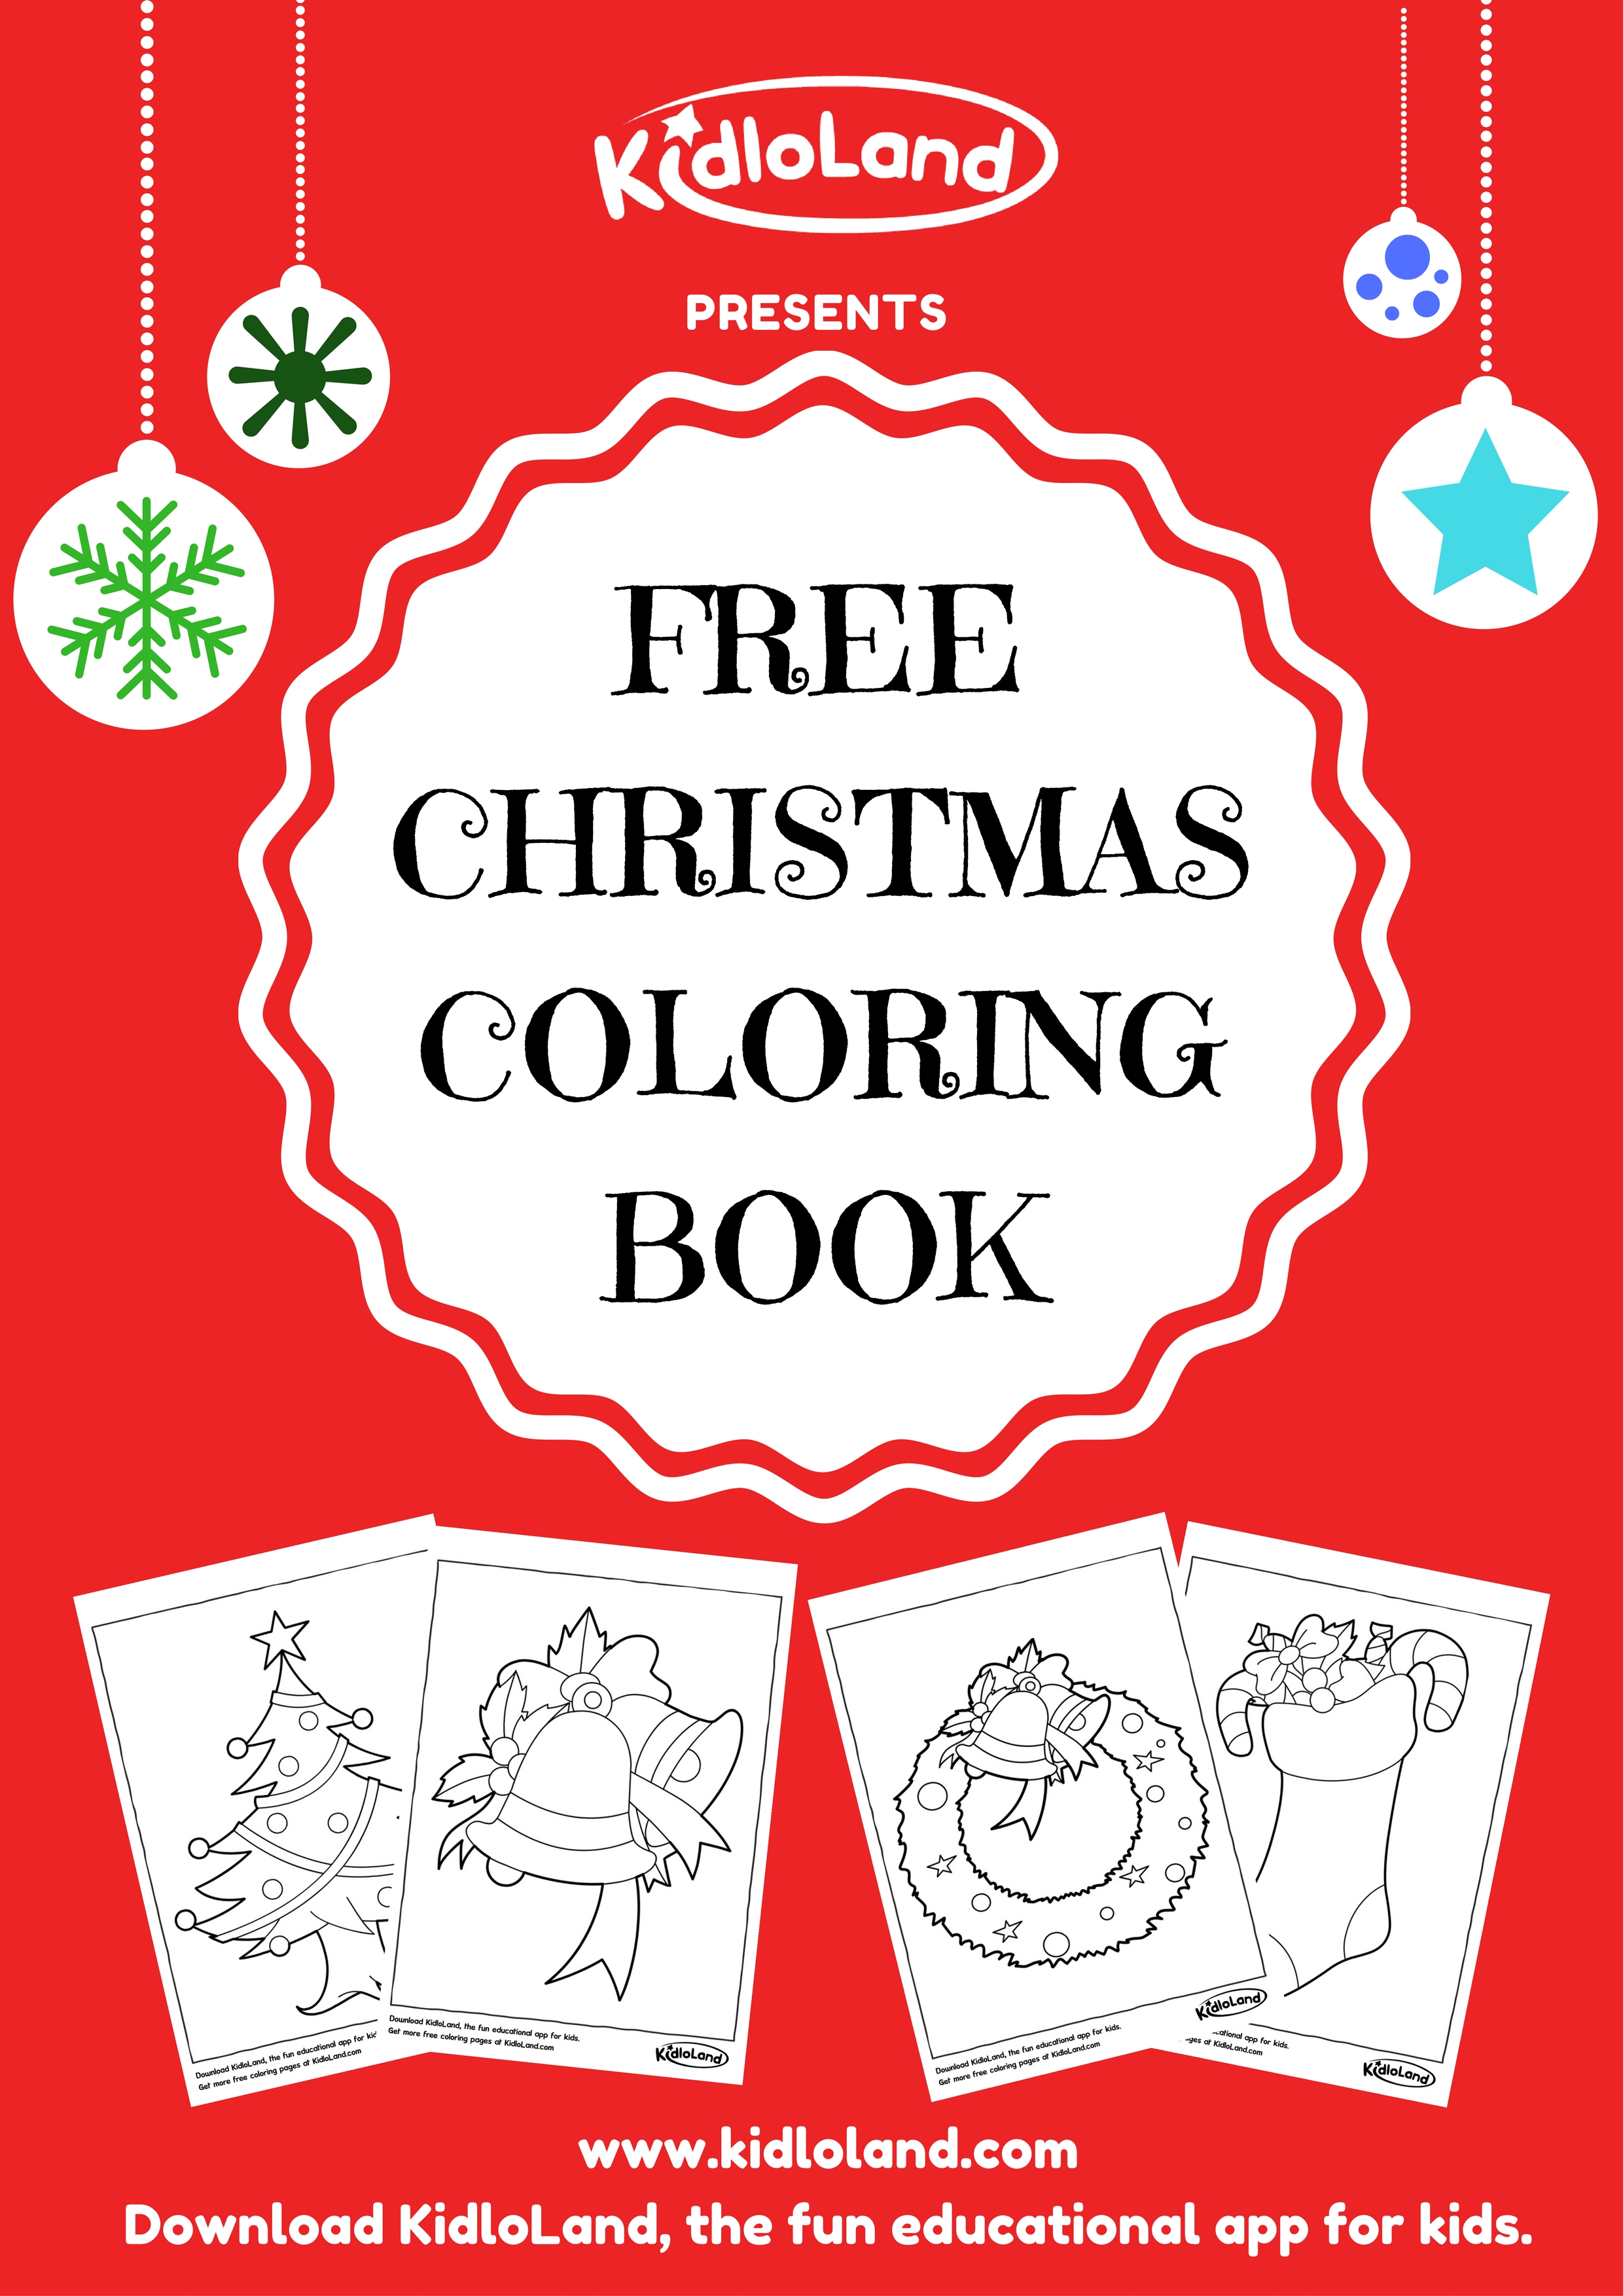 Christmas Coloring Book Free Download - Kids and Adult Coloring Pages